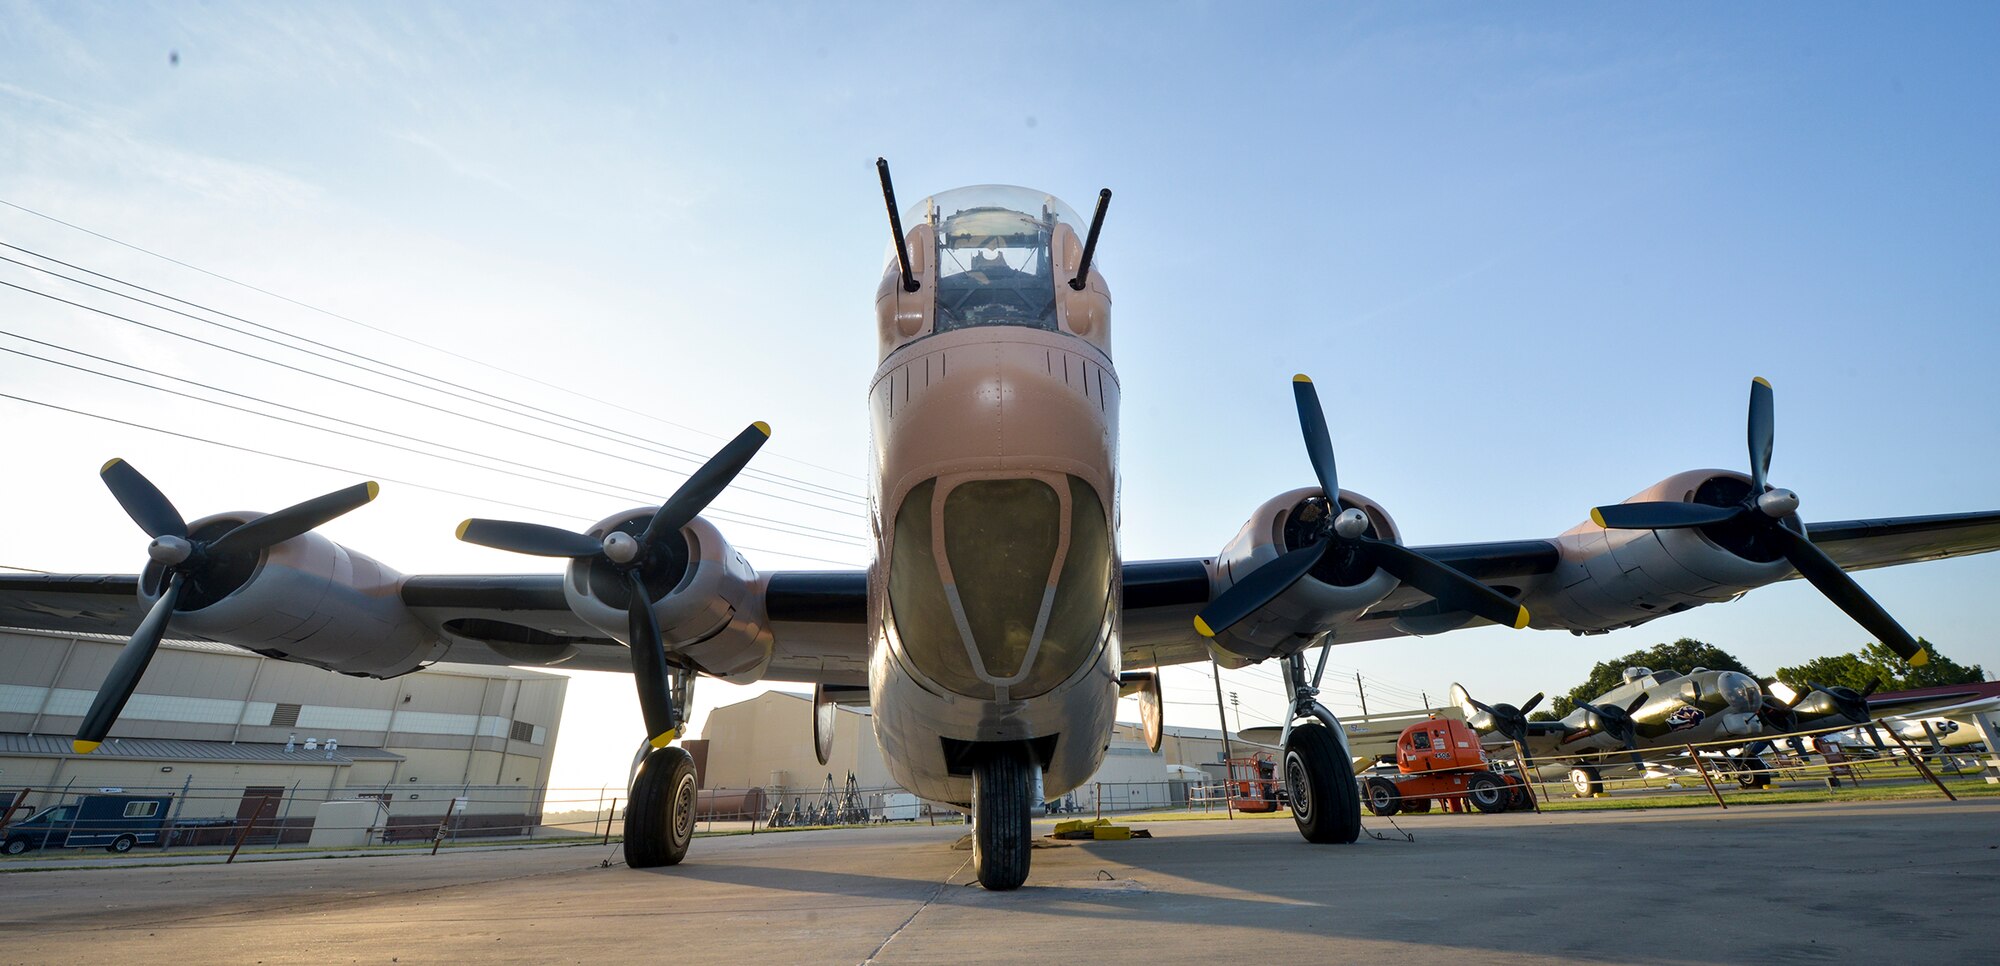 The Barksdale Global Power Museum’s J-model B-24 Liberator is one of the last in the world that was built at the Ford Motor Company’s Willow Run manufacturing complex in Michigan. It was recently painted in a desert sand paint scheme, to represent the Mediterranean Theater of Operations in World War II. (U.S. Air Force photo/Airman 1st Class Mozer O. Da Cunha)